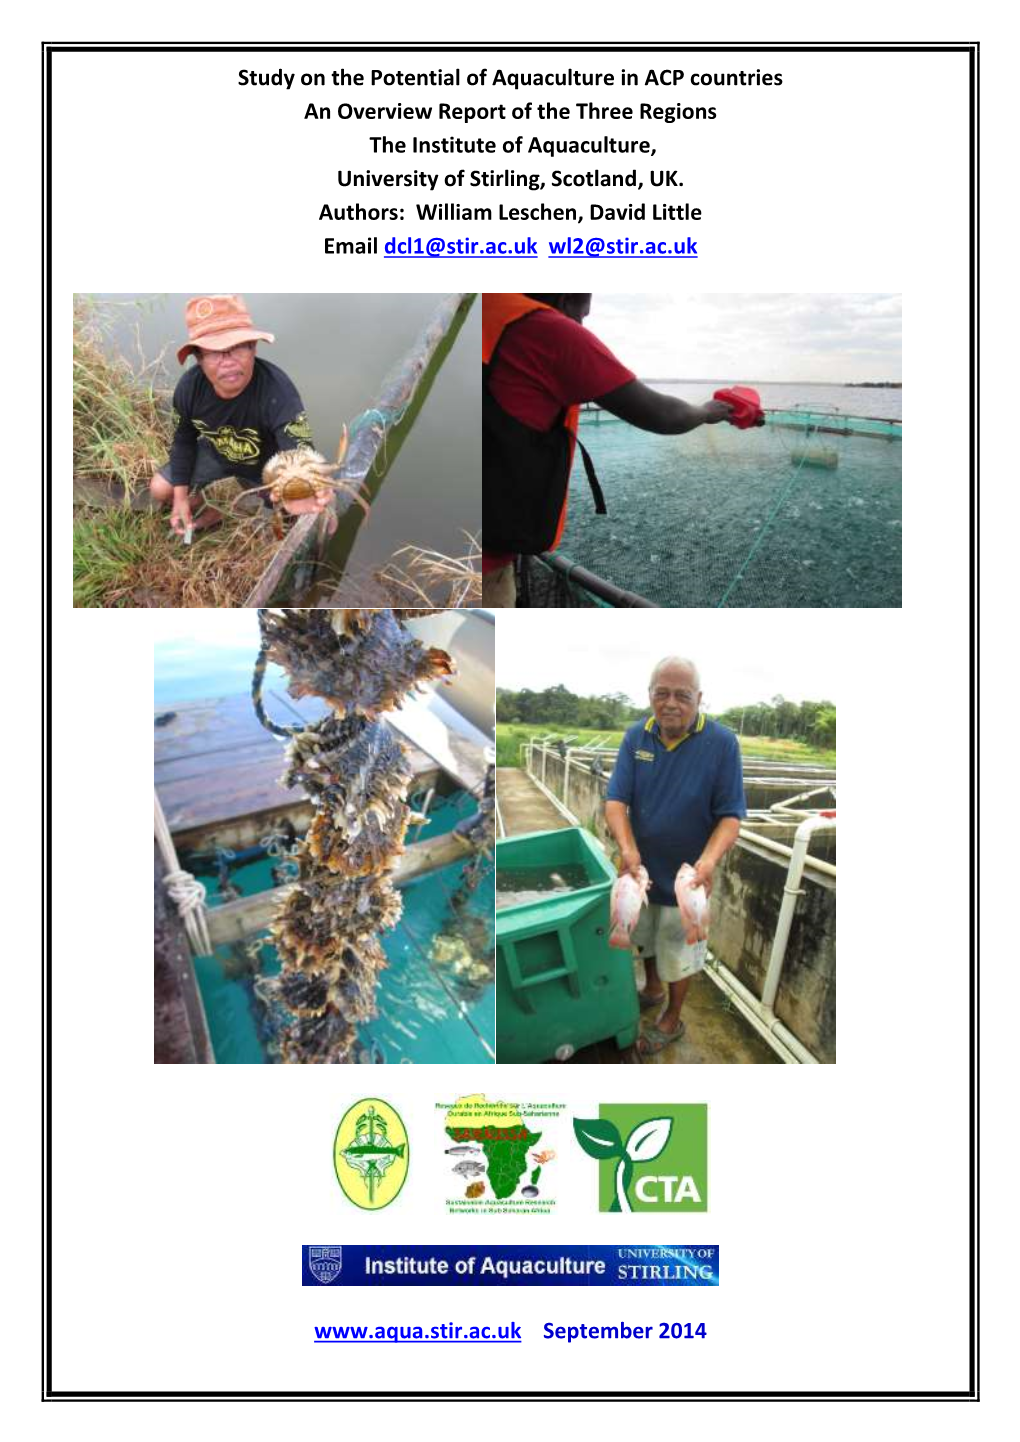 Study on the Potential of Aquaculture in ACP Countries an Overview Report of the Three Regions the Institute of Aquaculture, University of Stirling, Scotland, UK